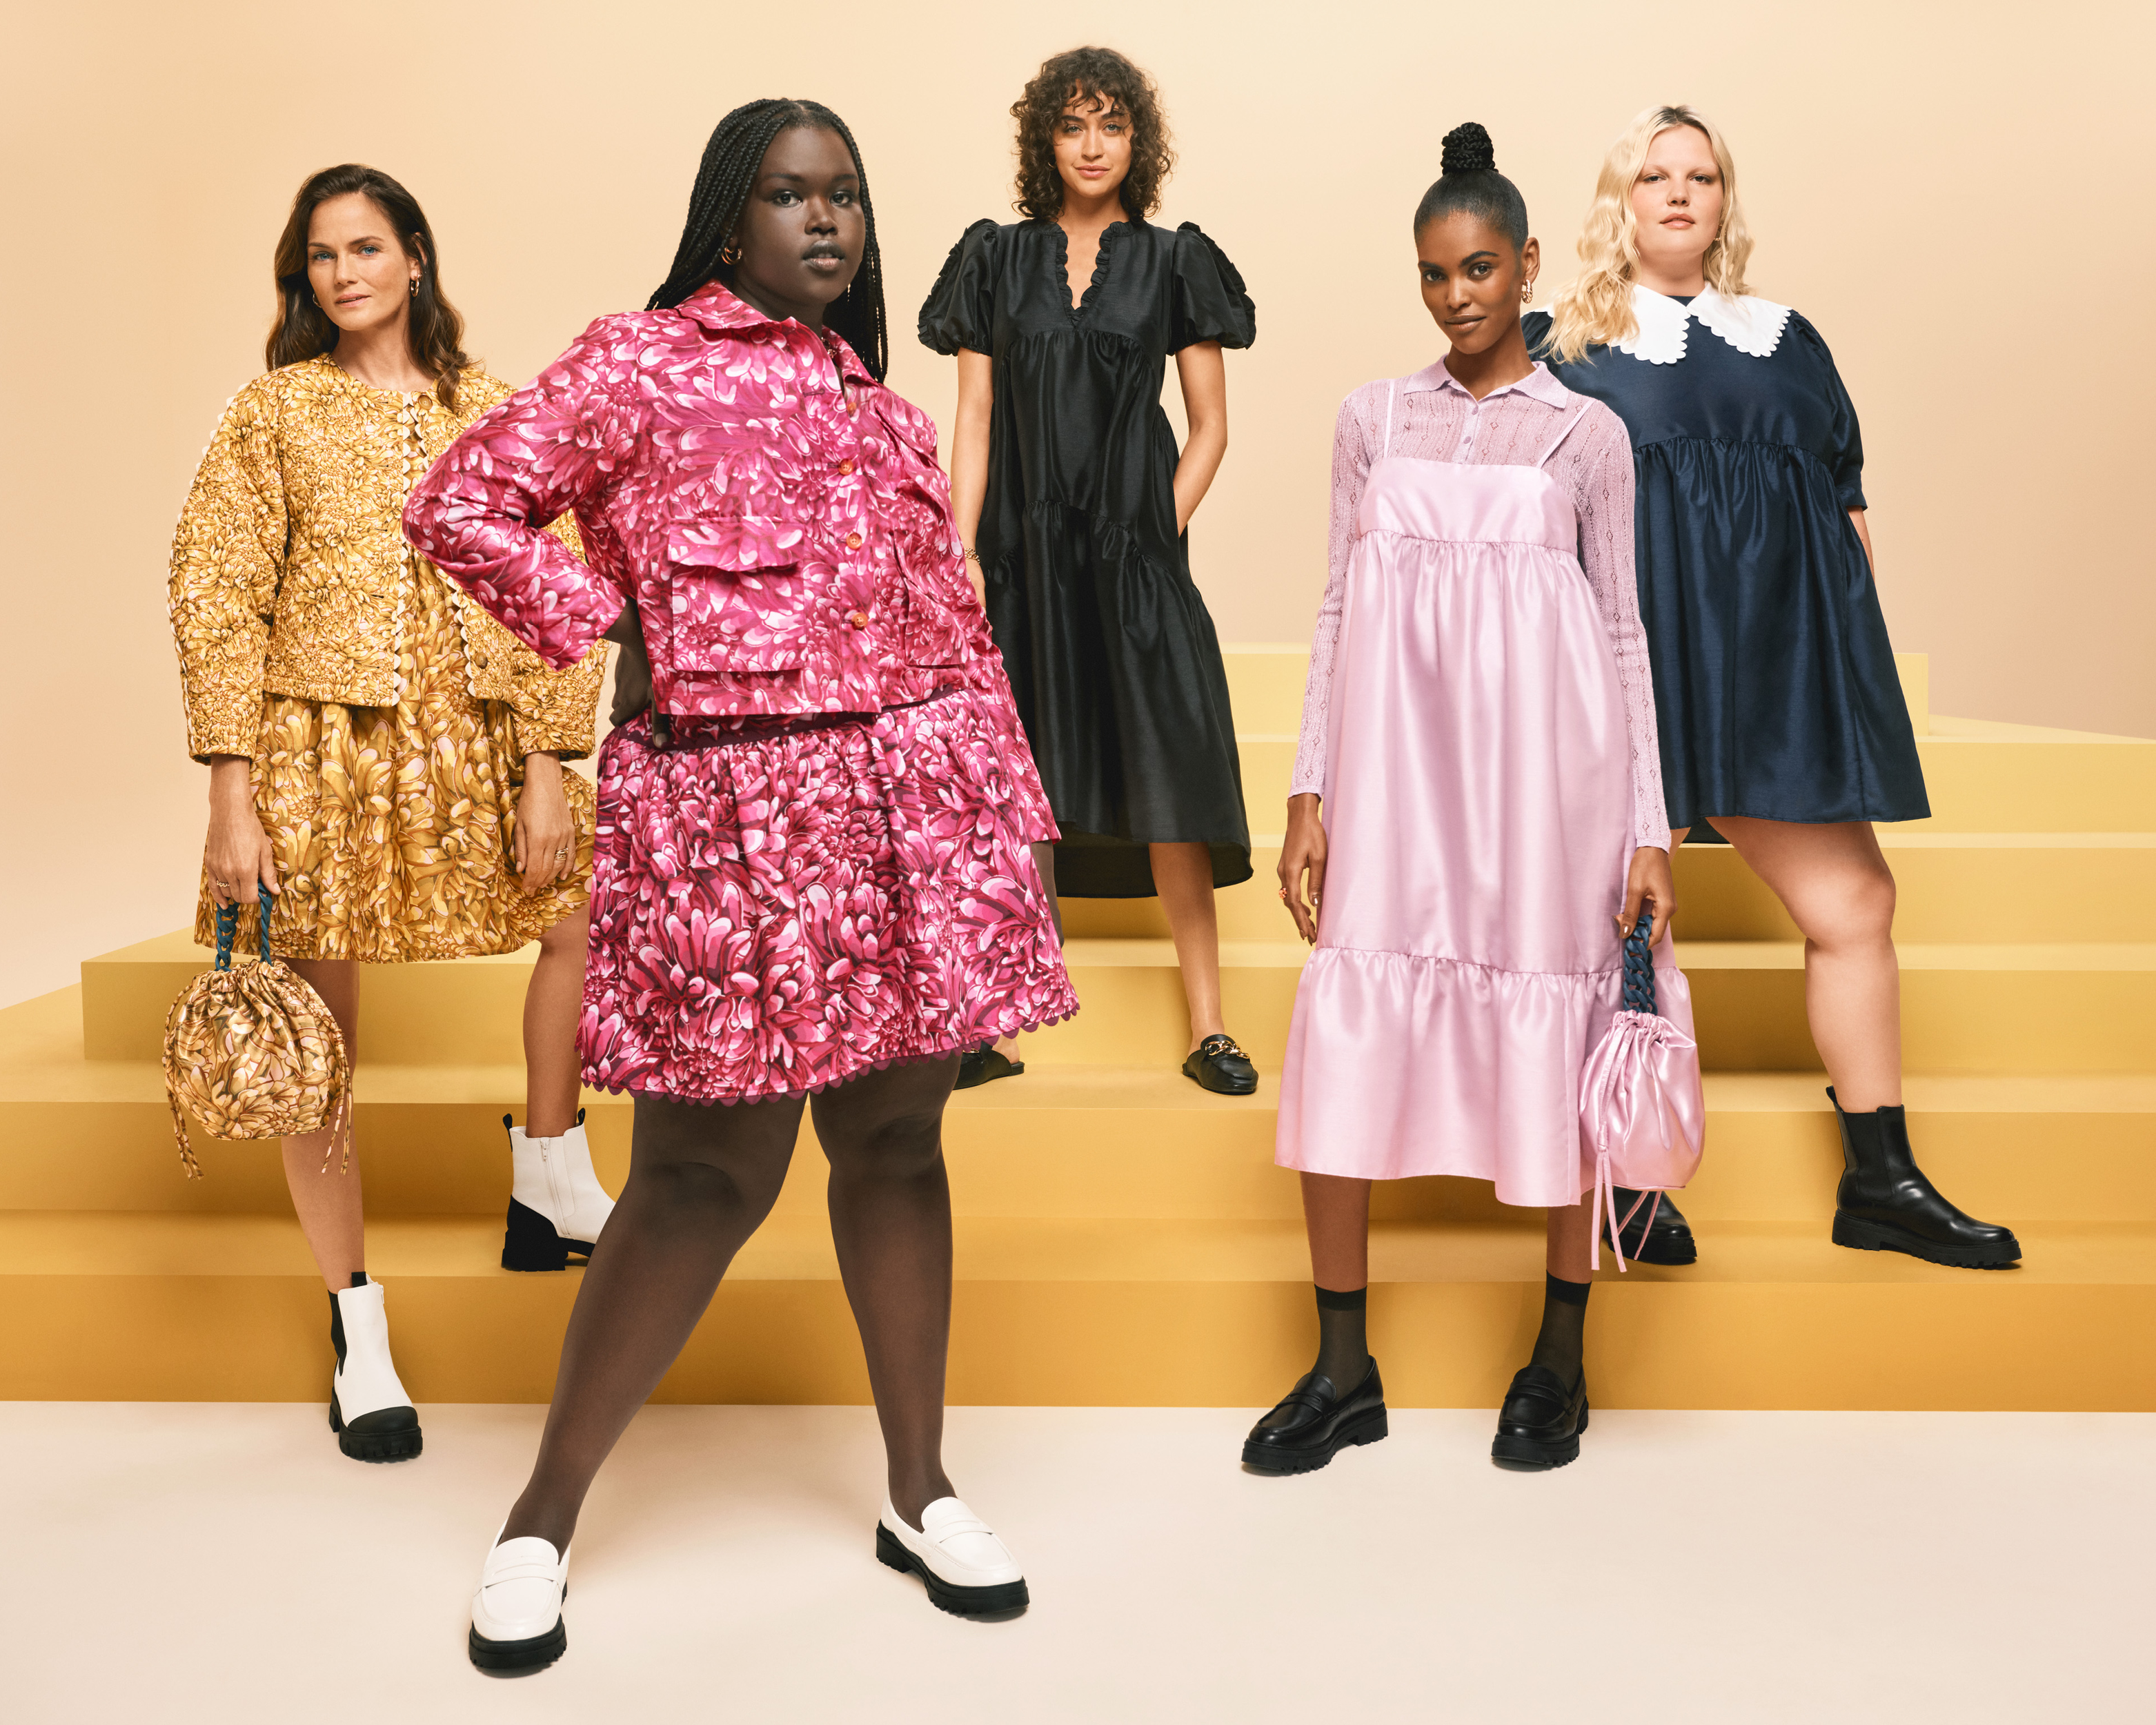 Five models stand on yellow steps wearing patterned skirts and tops and dresses.